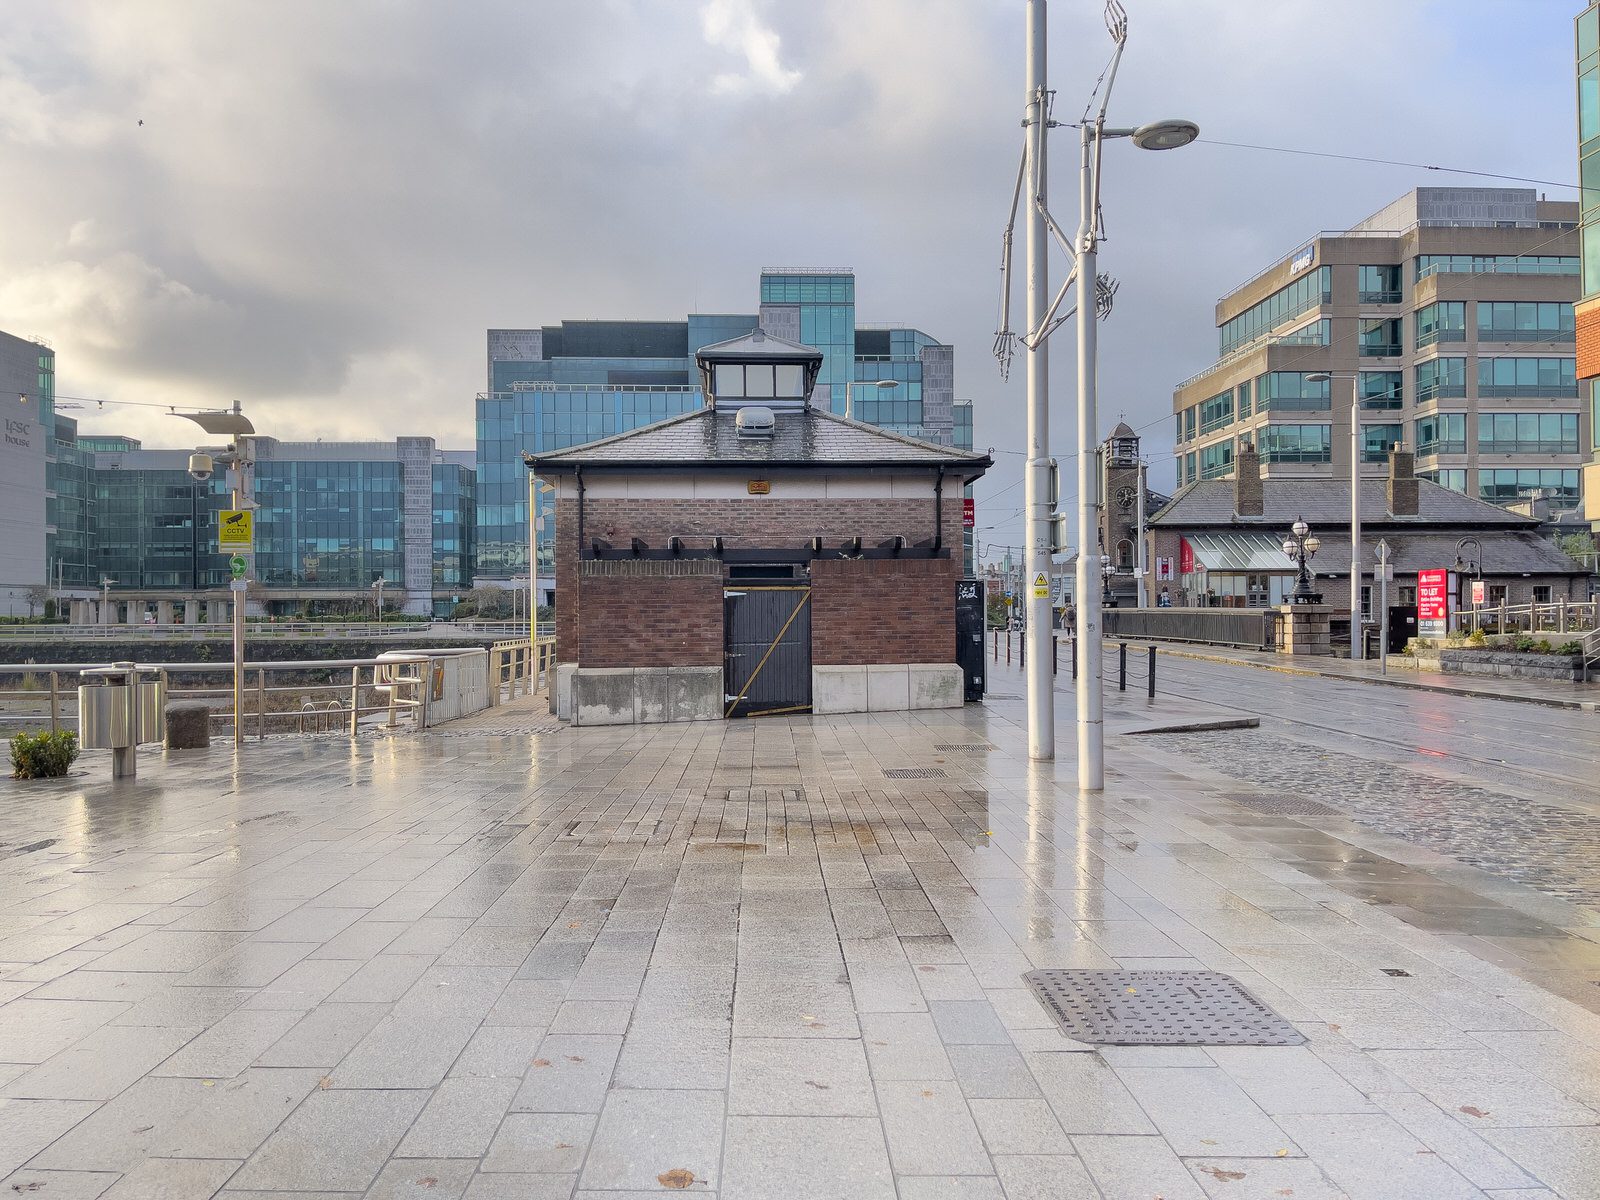 THE LUAS TRAM STOP AT GEORGE'S DOCK 008